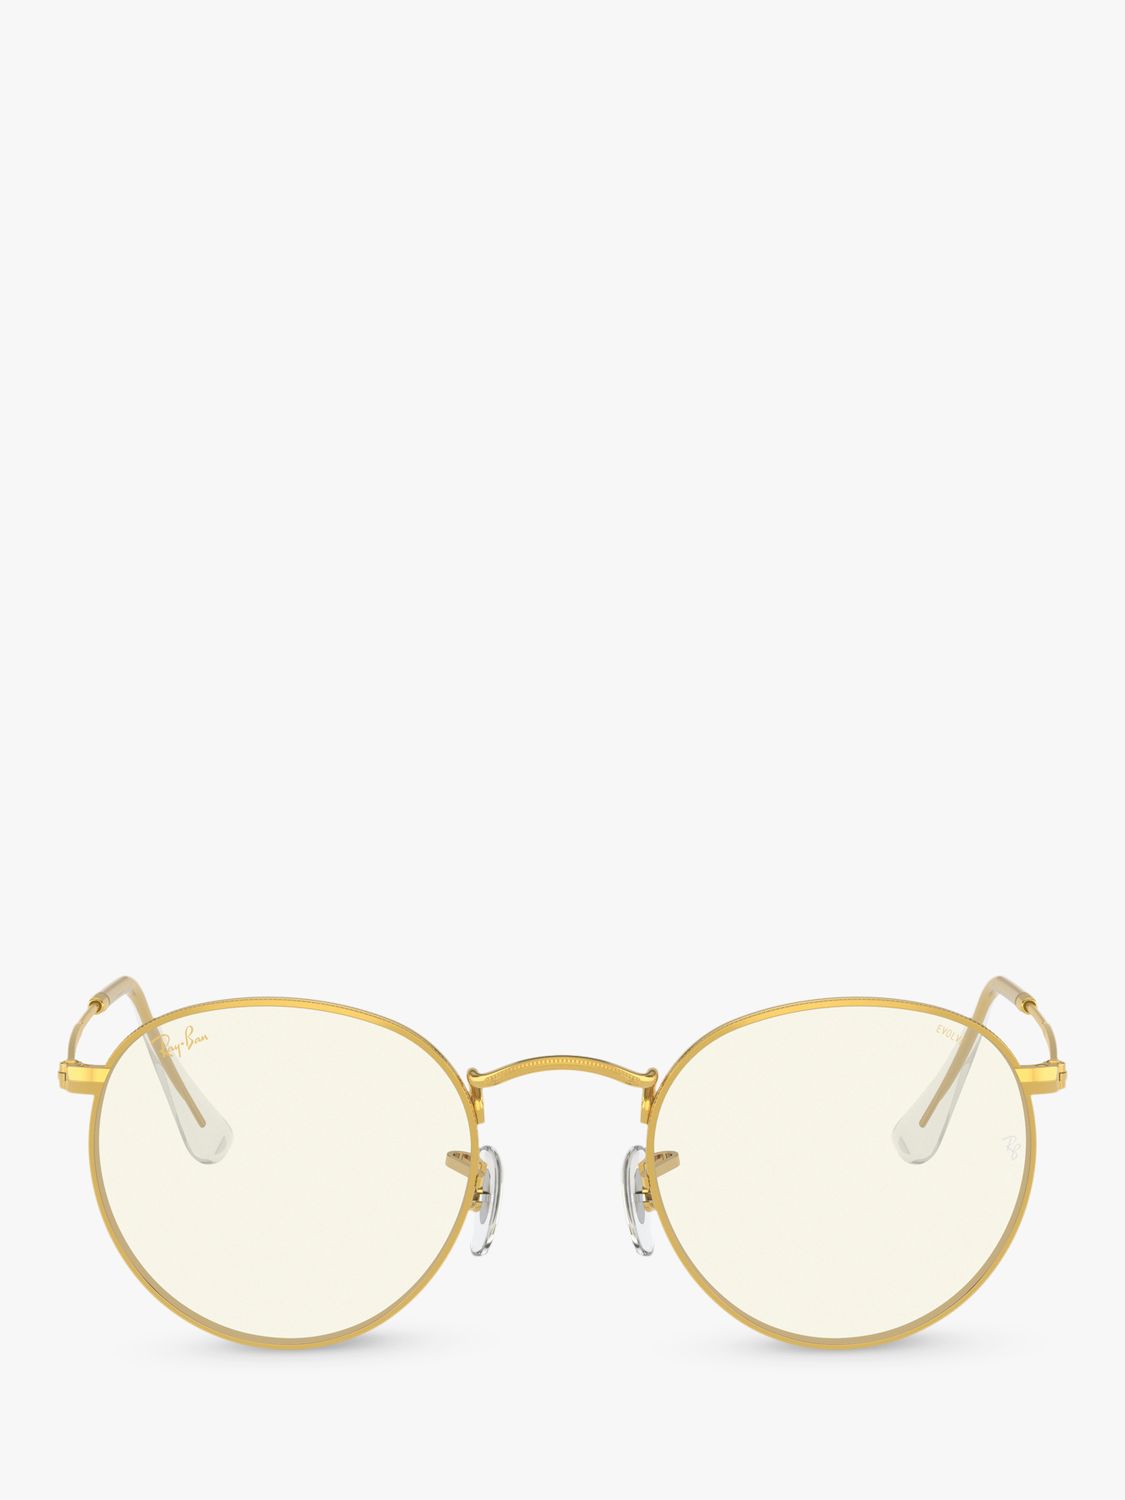 Ray-Ban RB3447 Women's Round Metal Sunglasses, Gold at John Lewis & Partners